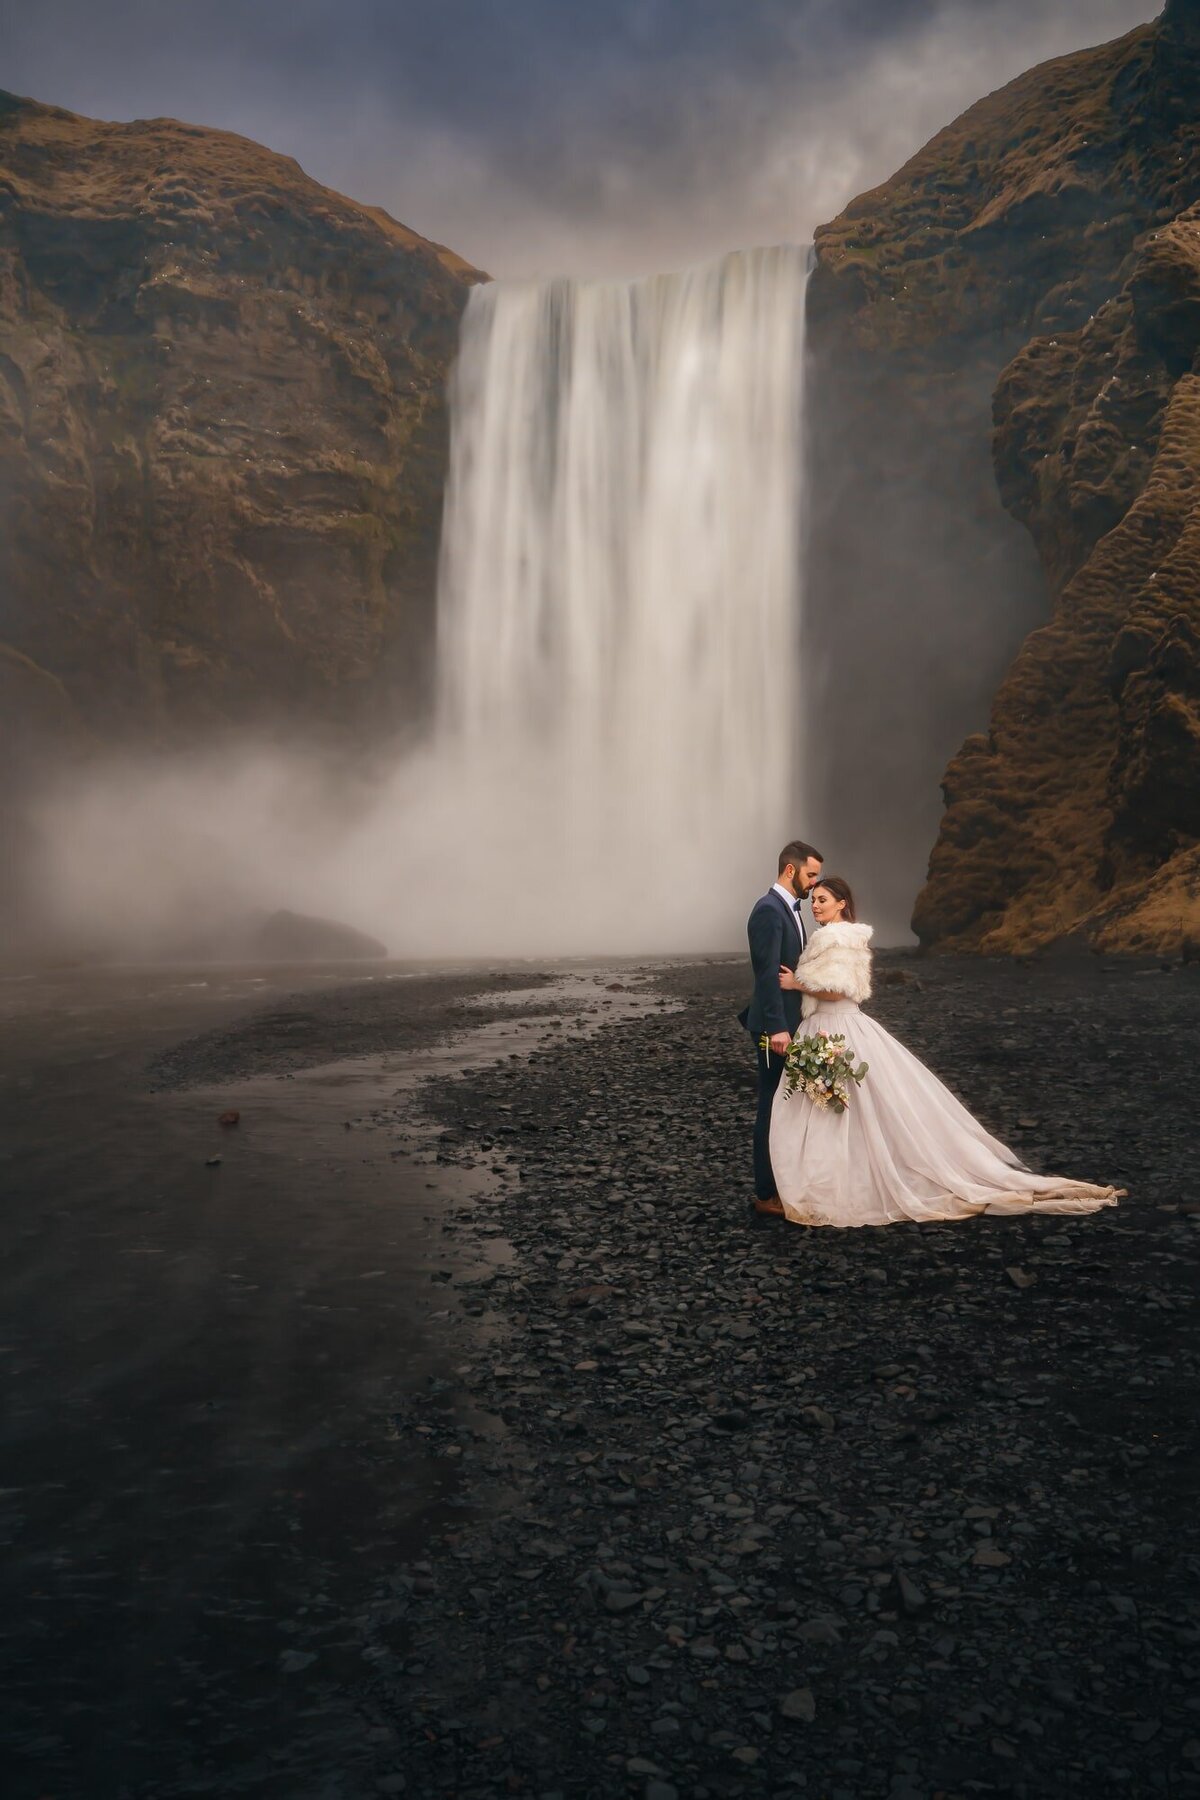 This couple shares a special moment in front of the breathtaking Skogafoss waterfall in Iceland, capturing the essence of their love amid the cascading beauty.